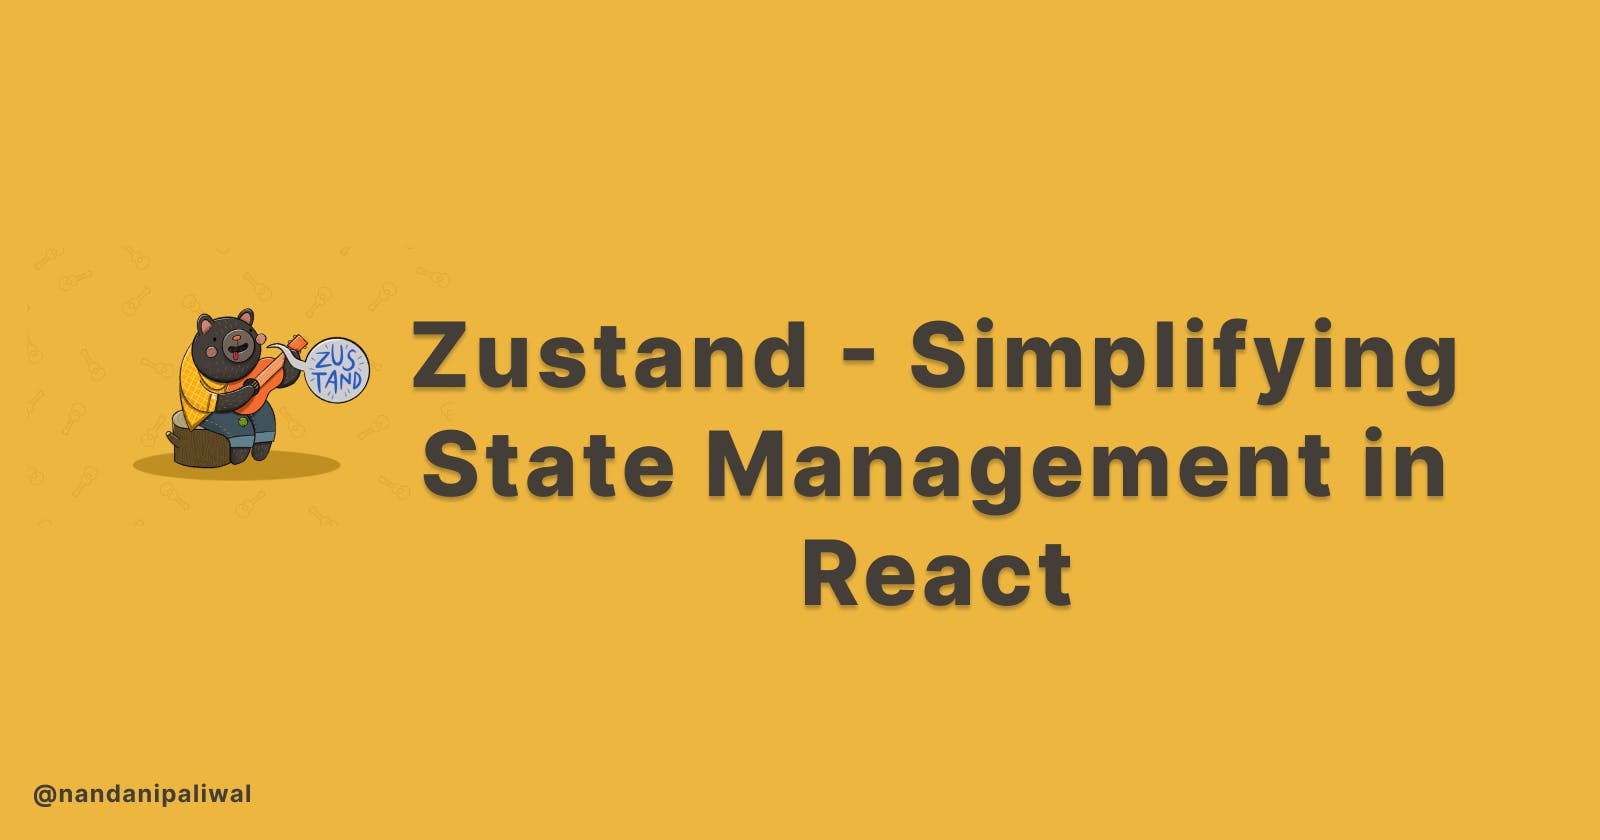 Zustand - Simplifying State Management in React